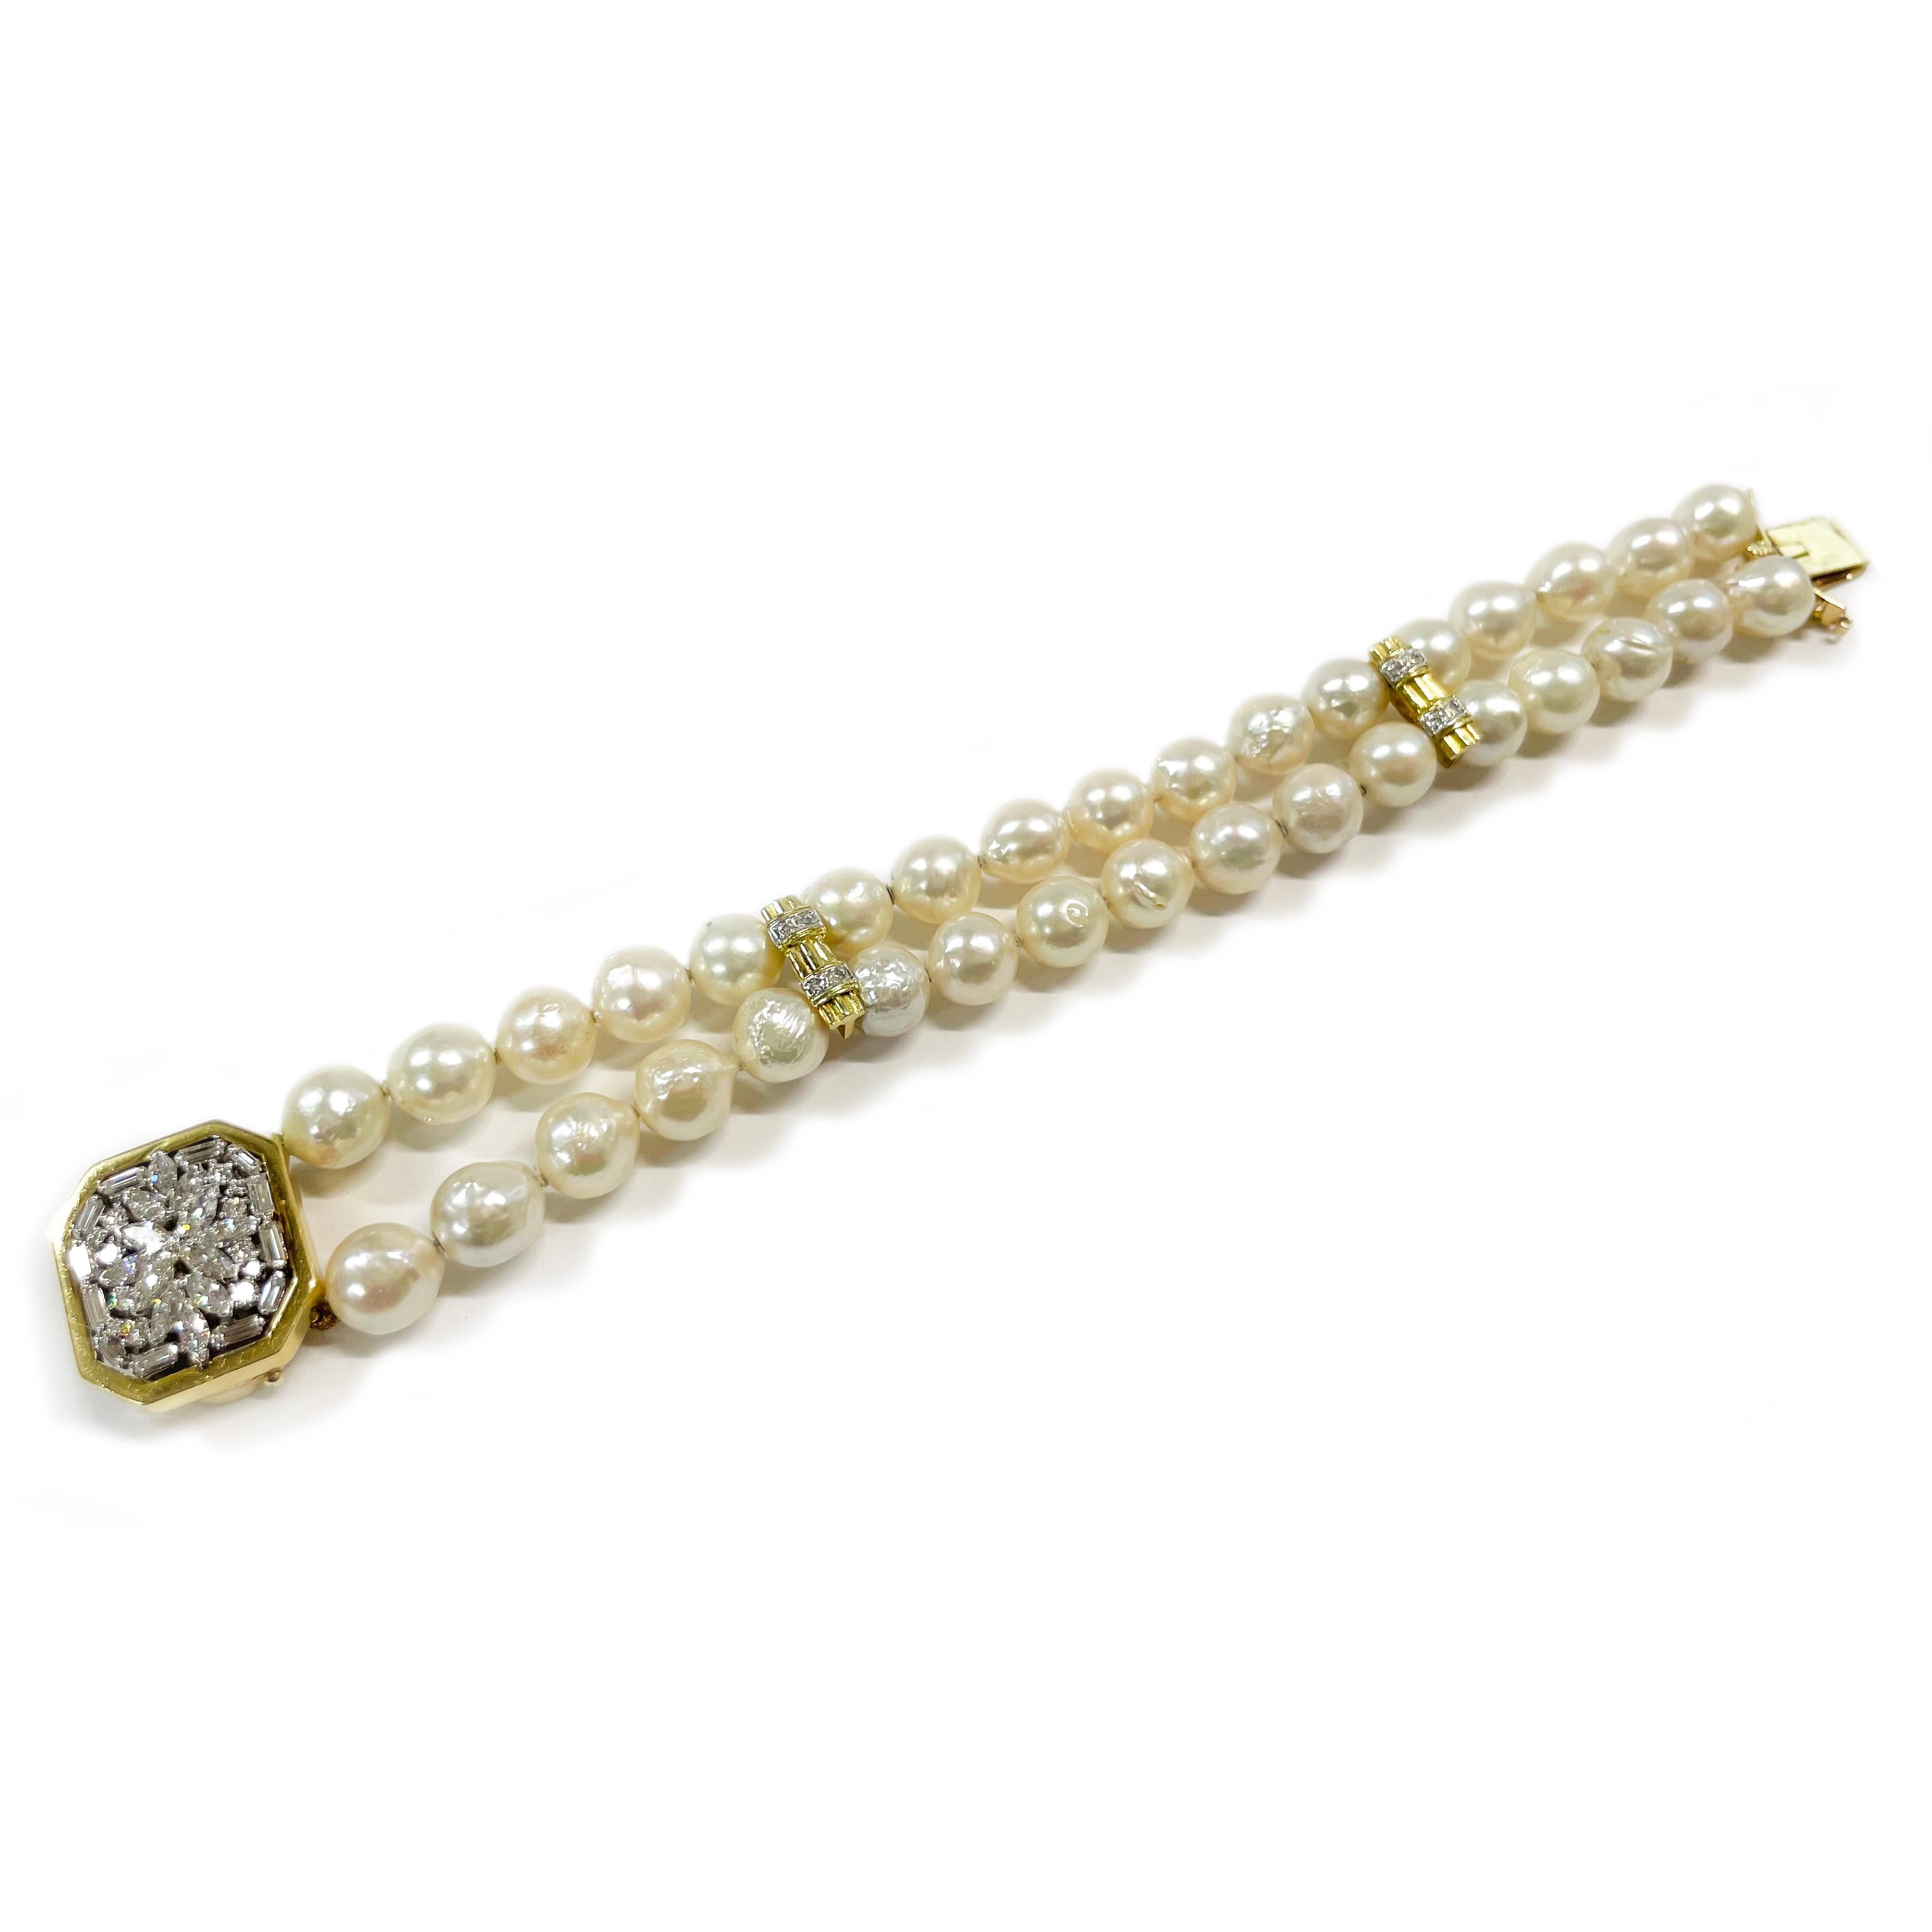 14 Karat Yellow Gold Two-Strand Pearl Diamond Bracelet. Absolutely lovely two-strand baroque cultured pearl bracelet with double yellow gold bars with diamond accents and an octagon shaped diamond encrusted box closure. The bracelet features eleven